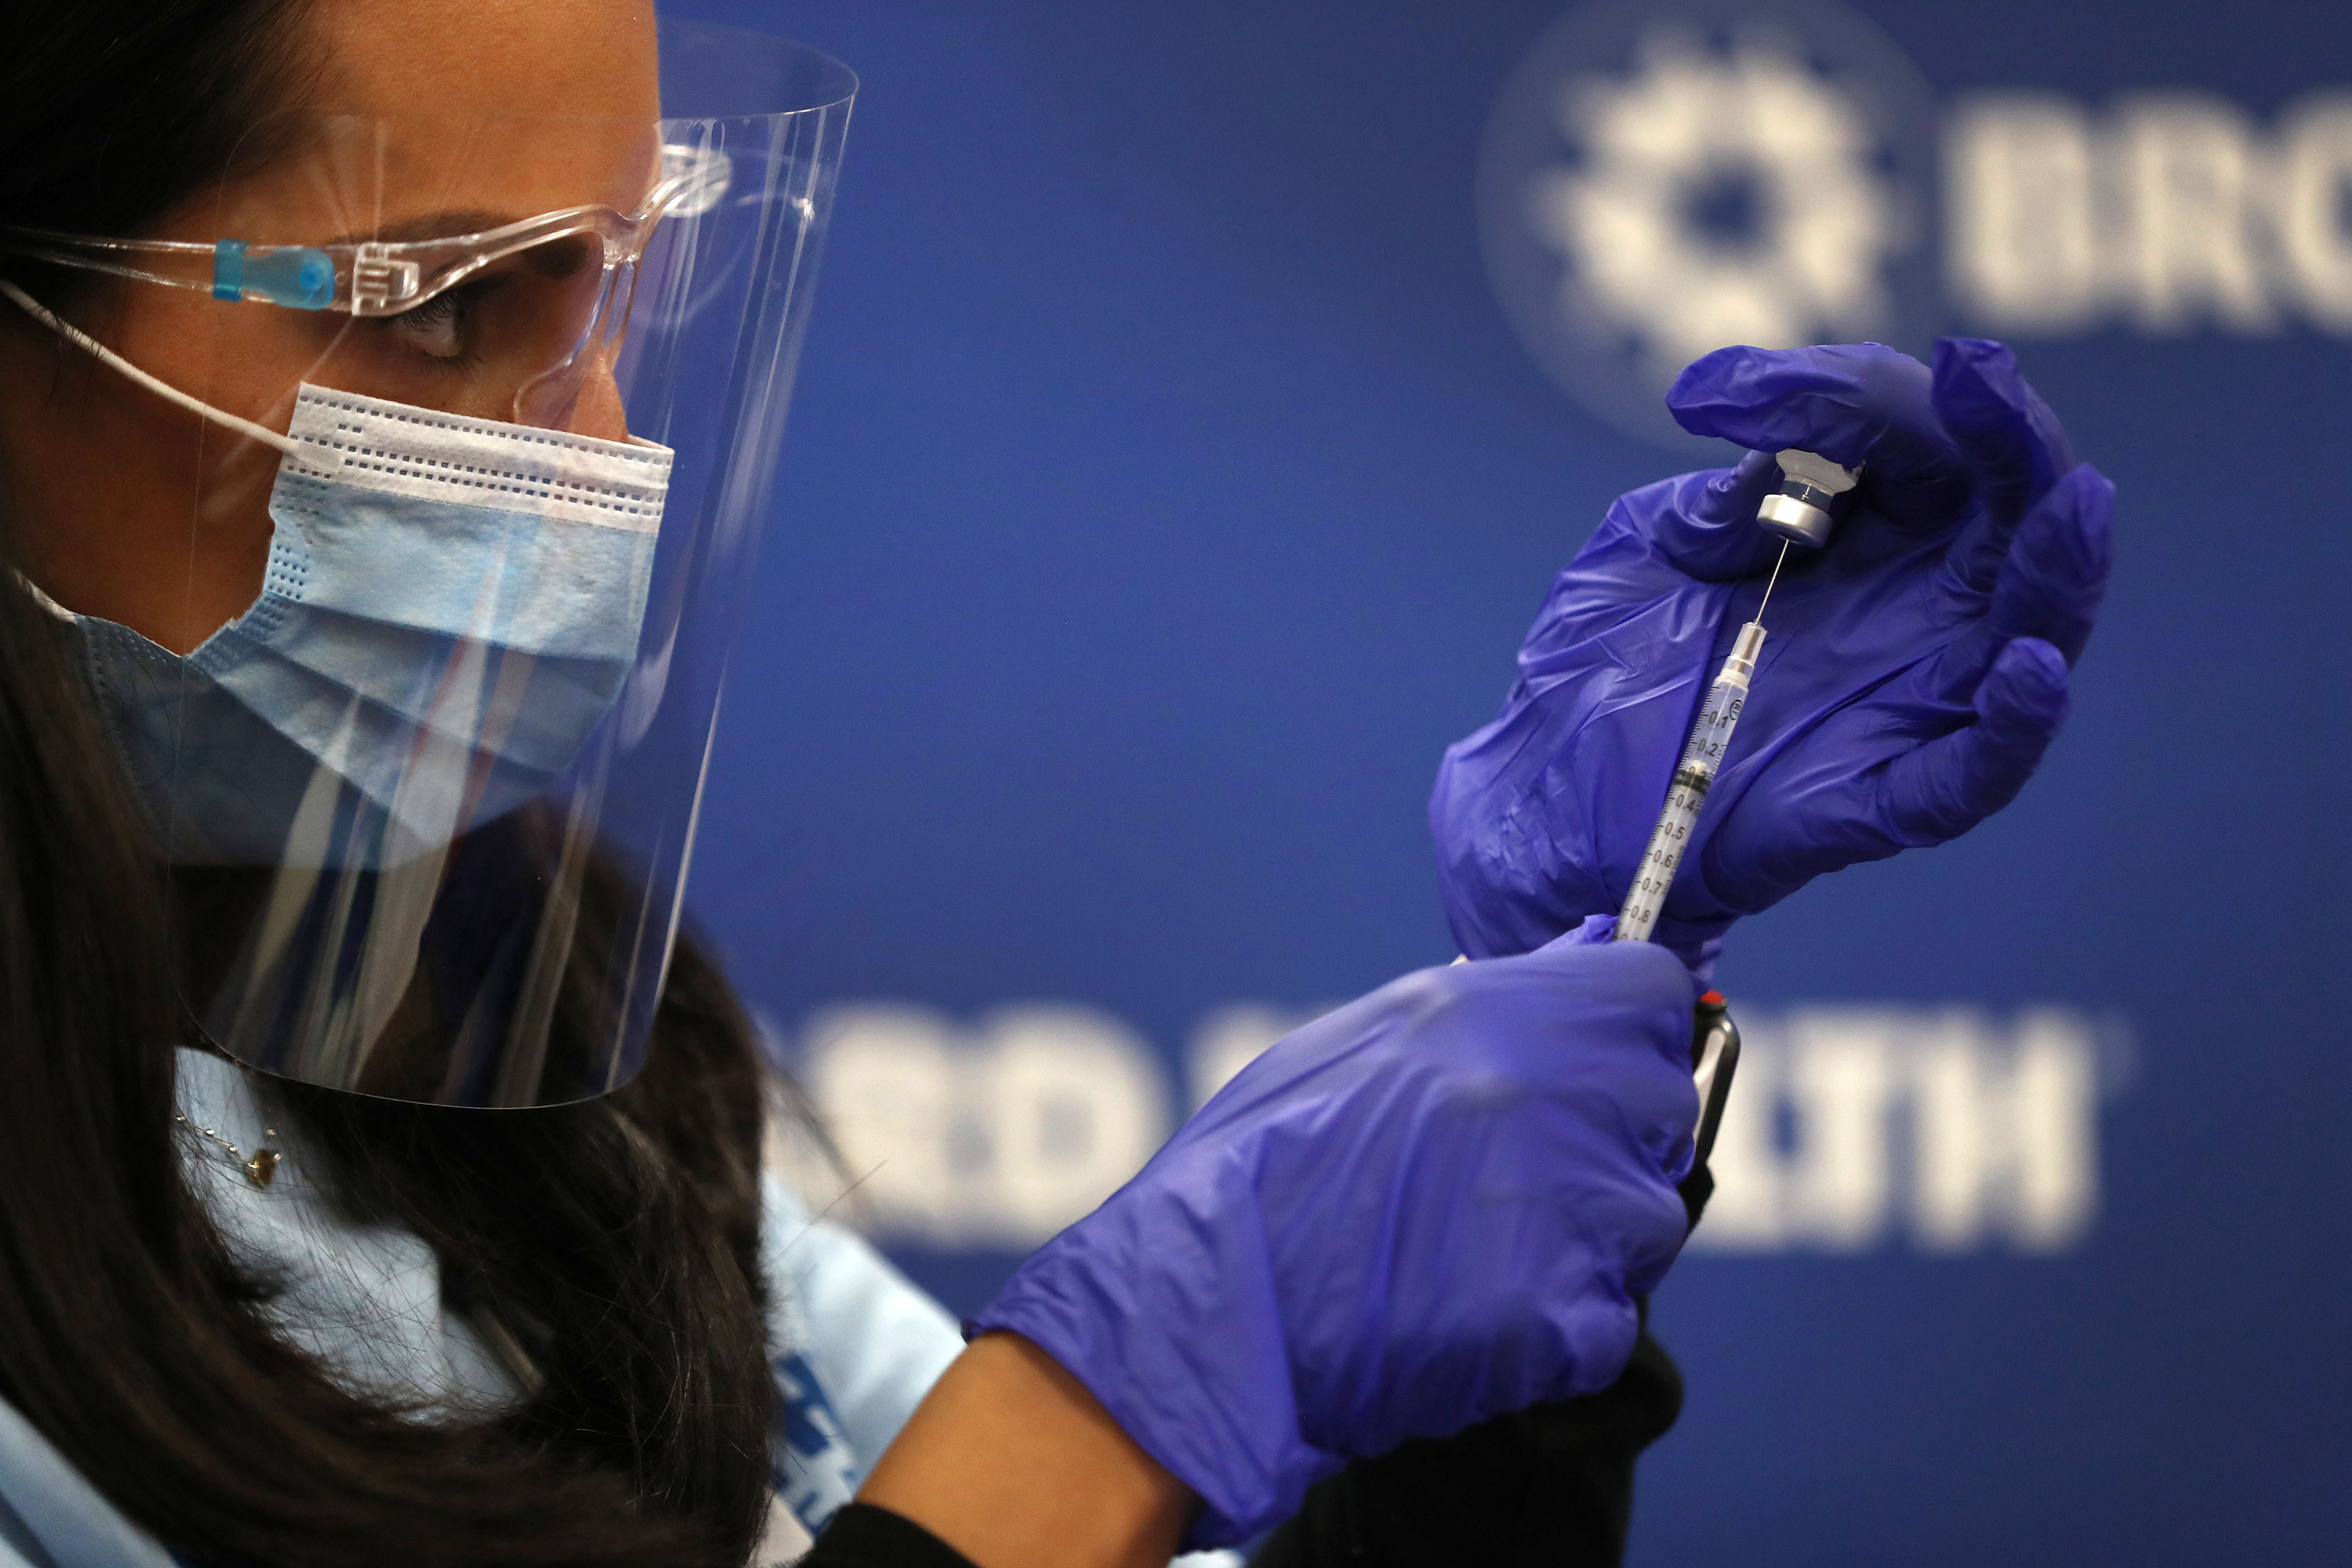 A nurse practitioner from Broward Health Medical Center prepares a Pfizer/BioNTech Covid-19 vaccine on December 17 in Fort Lauderdale, Florida.